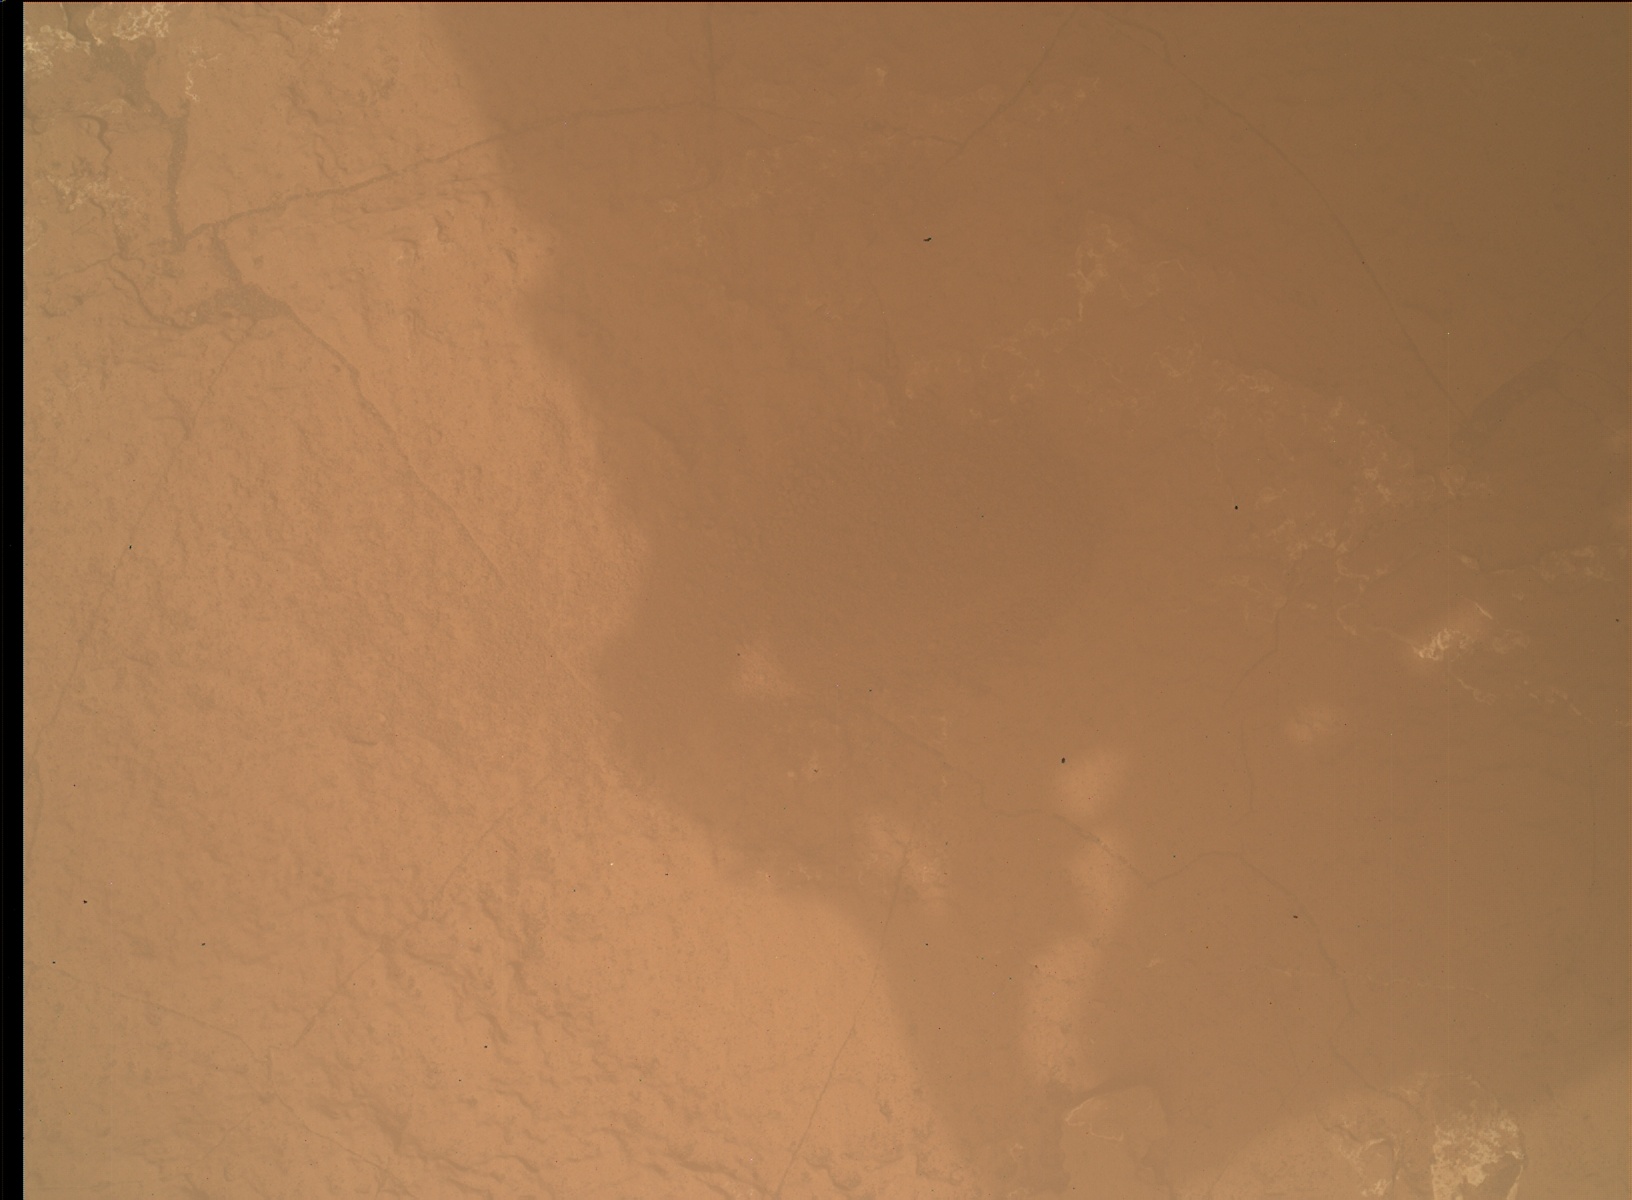 Nasa's Mars rover Curiosity acquired this image using its Mars Hand Lens Imager (MAHLI) on Sol 1533